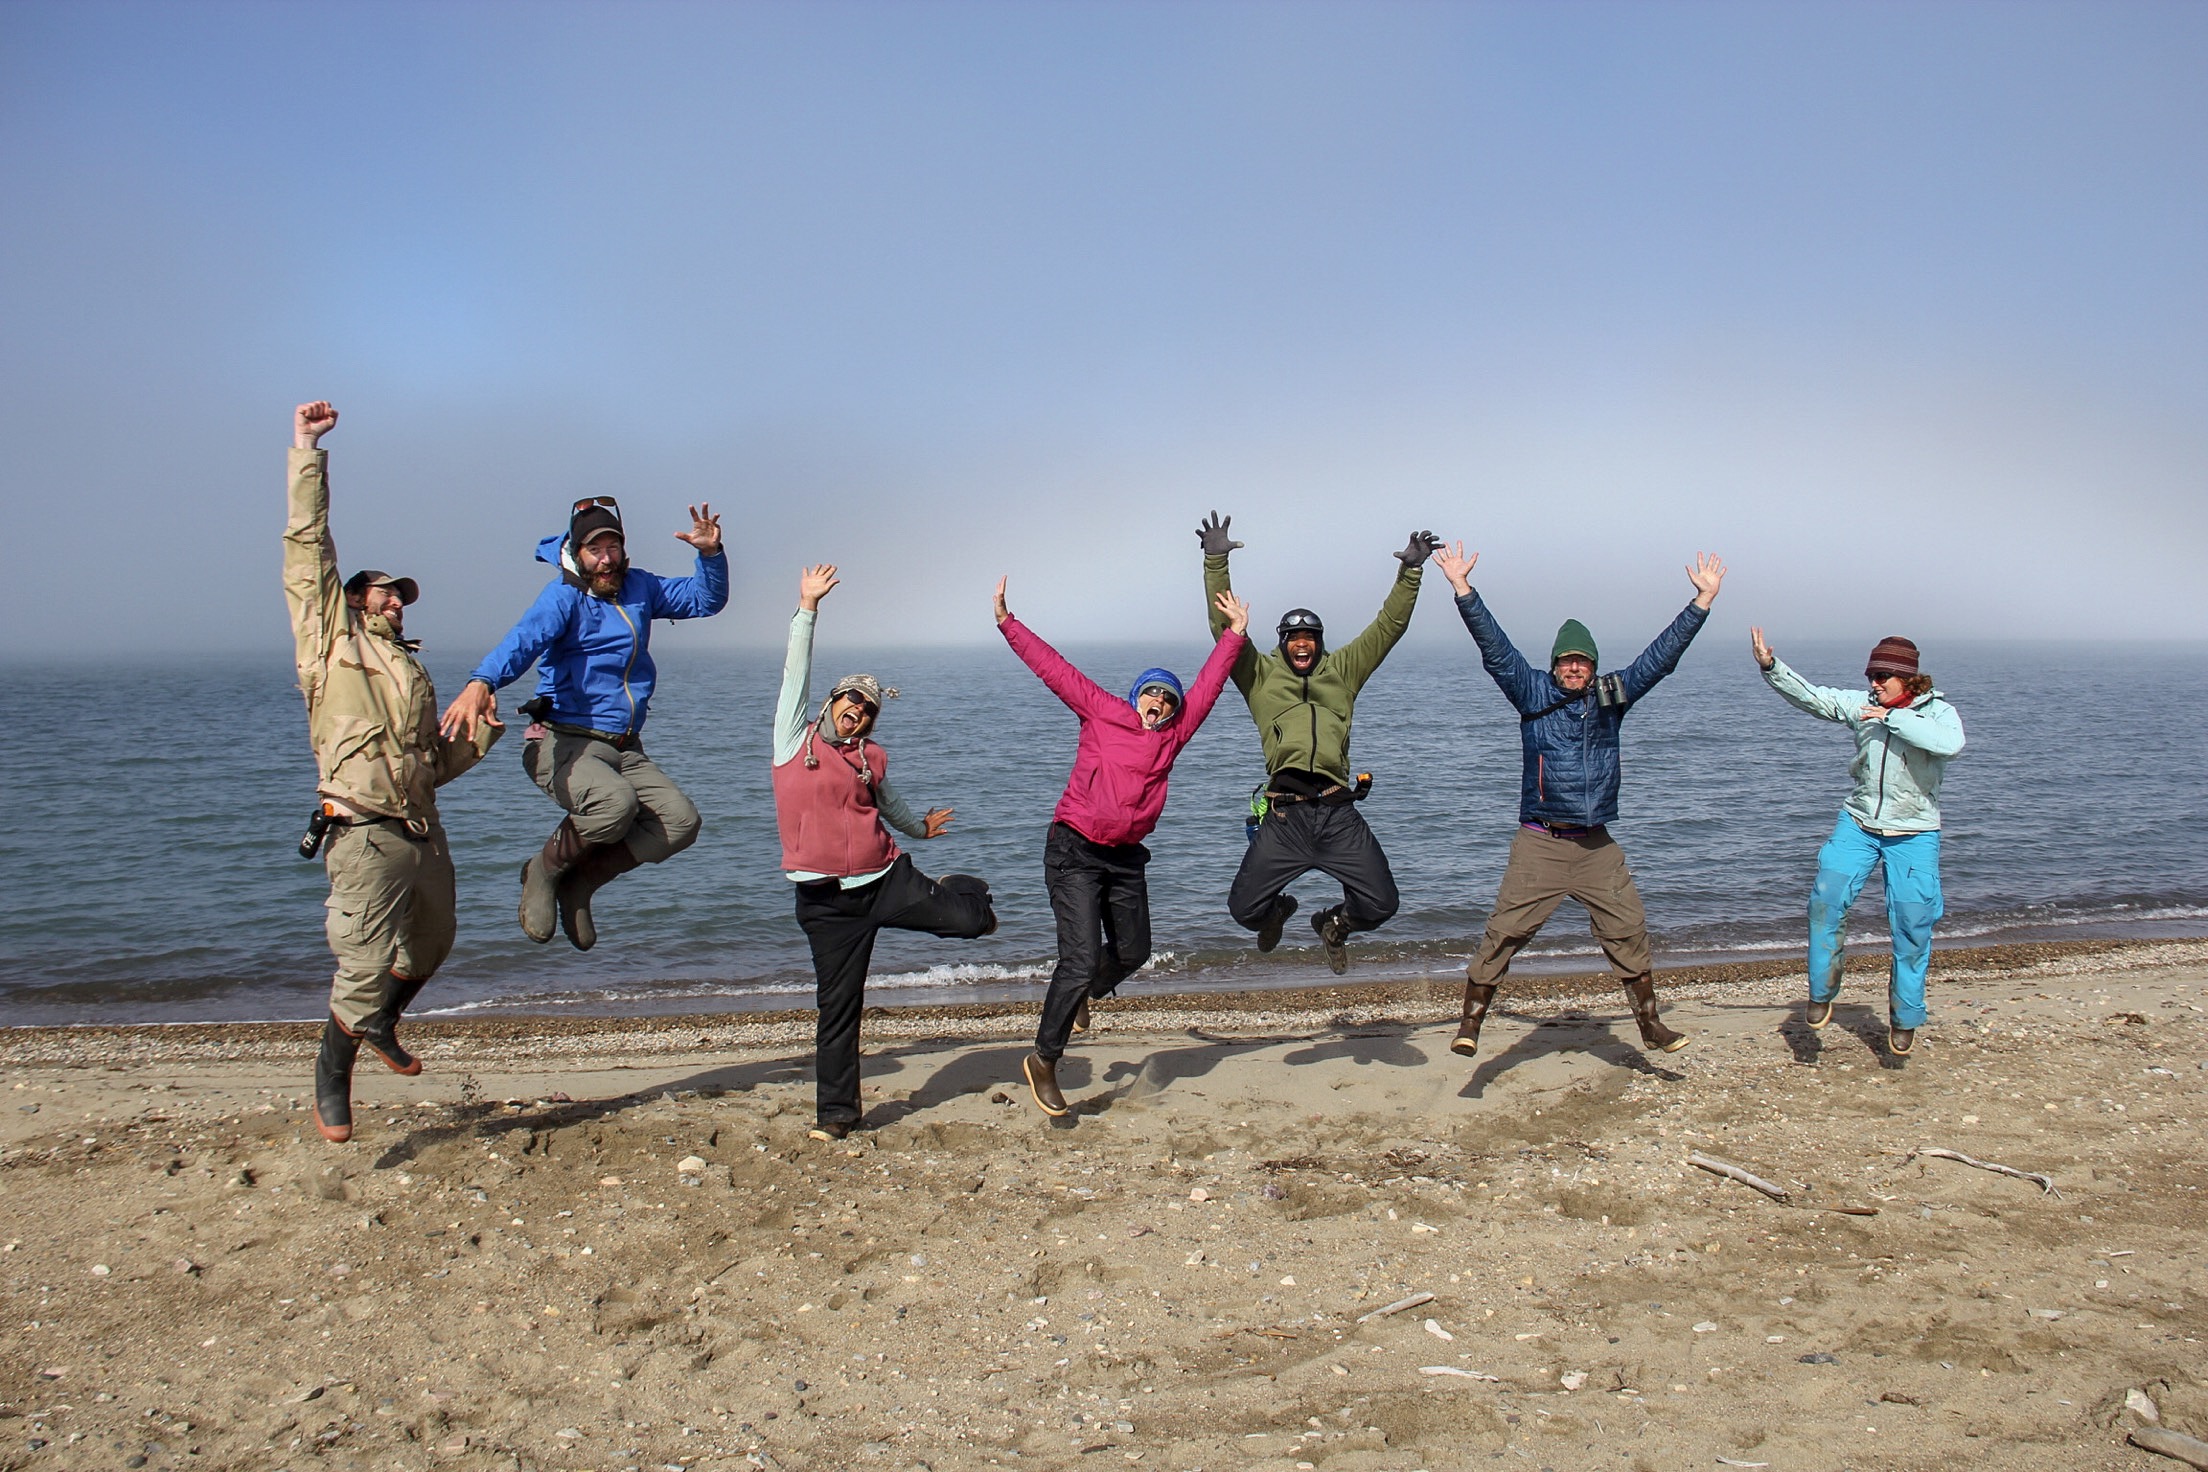 Sierra Club Military Outdoors participants jumping on the beach